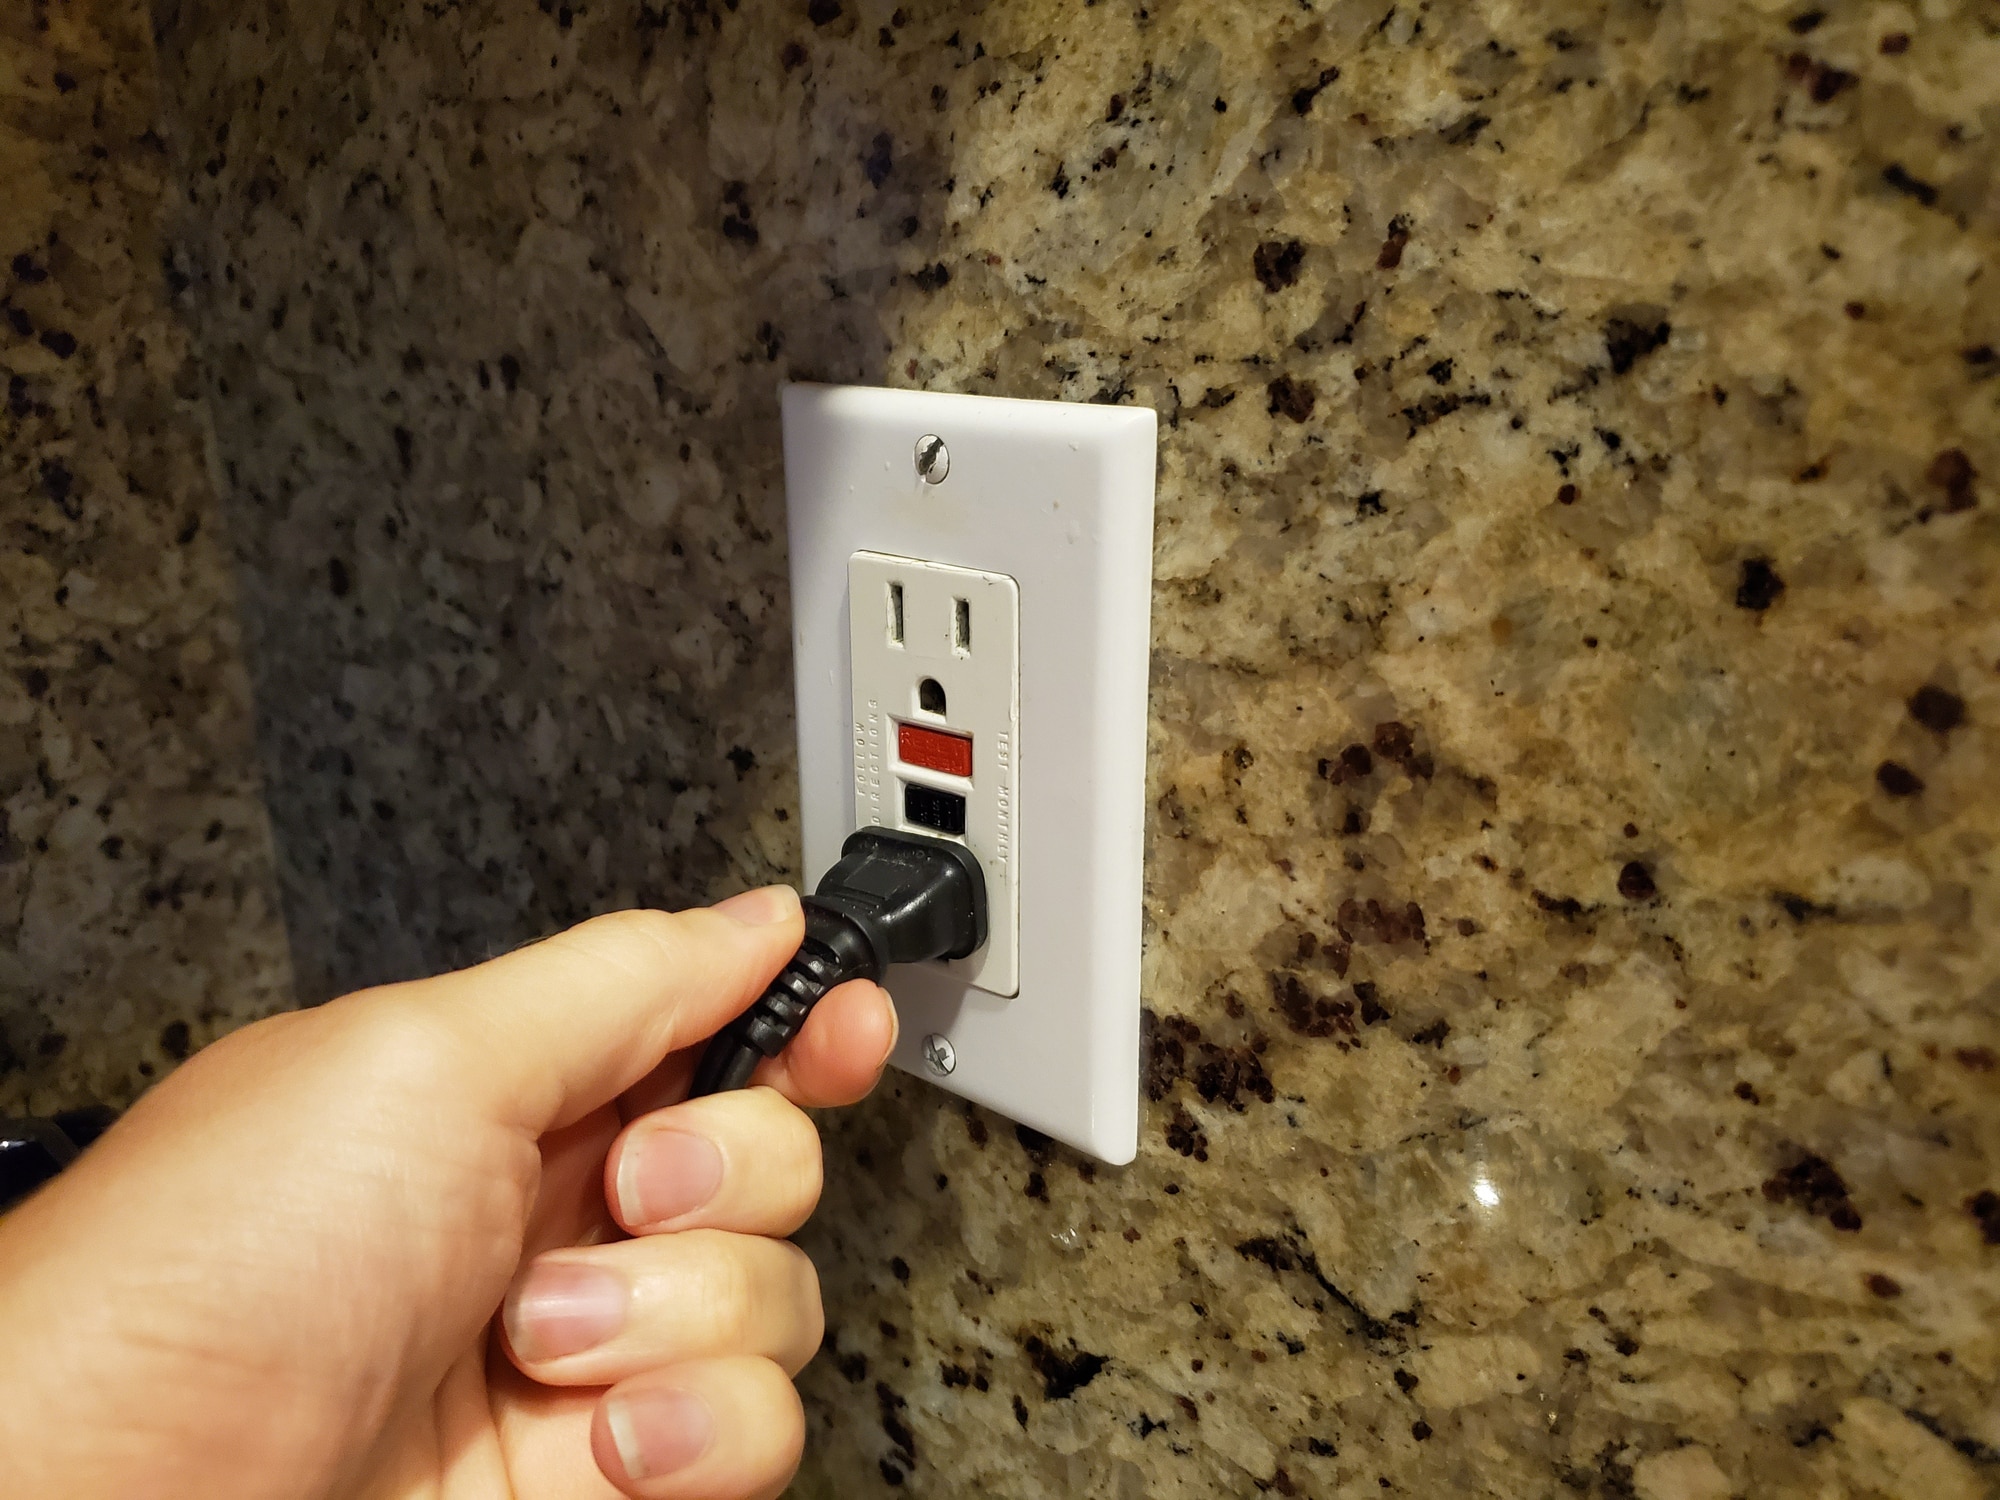  GFCI Outlets are a Safe Choice for Bathrooms and Kitchens to Maintain Electrical Safety